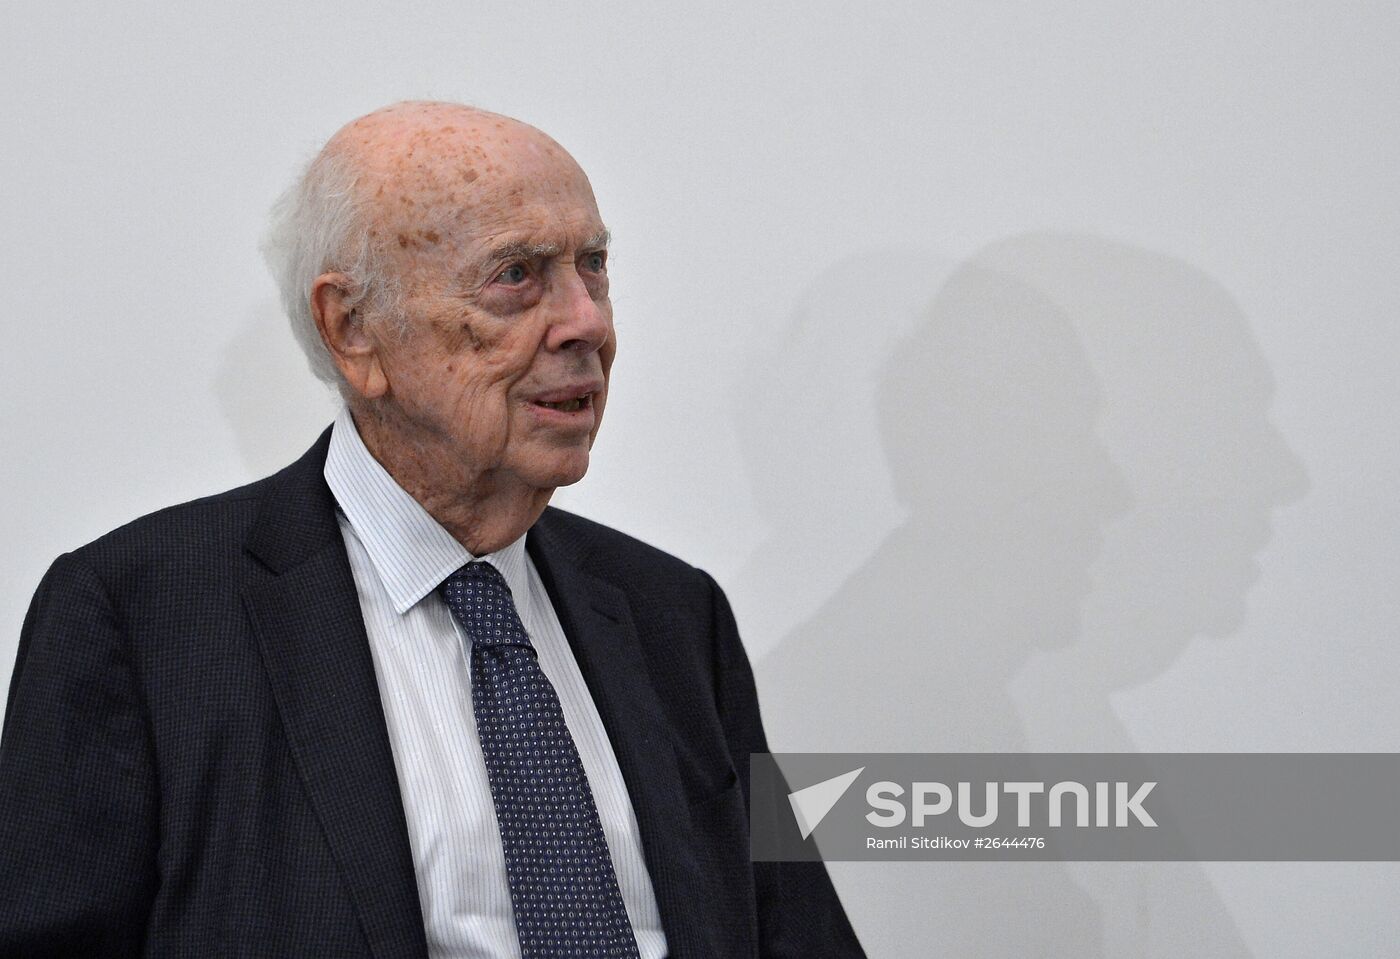 Nobel Prize winner James Watson gives open lecture in Moscow